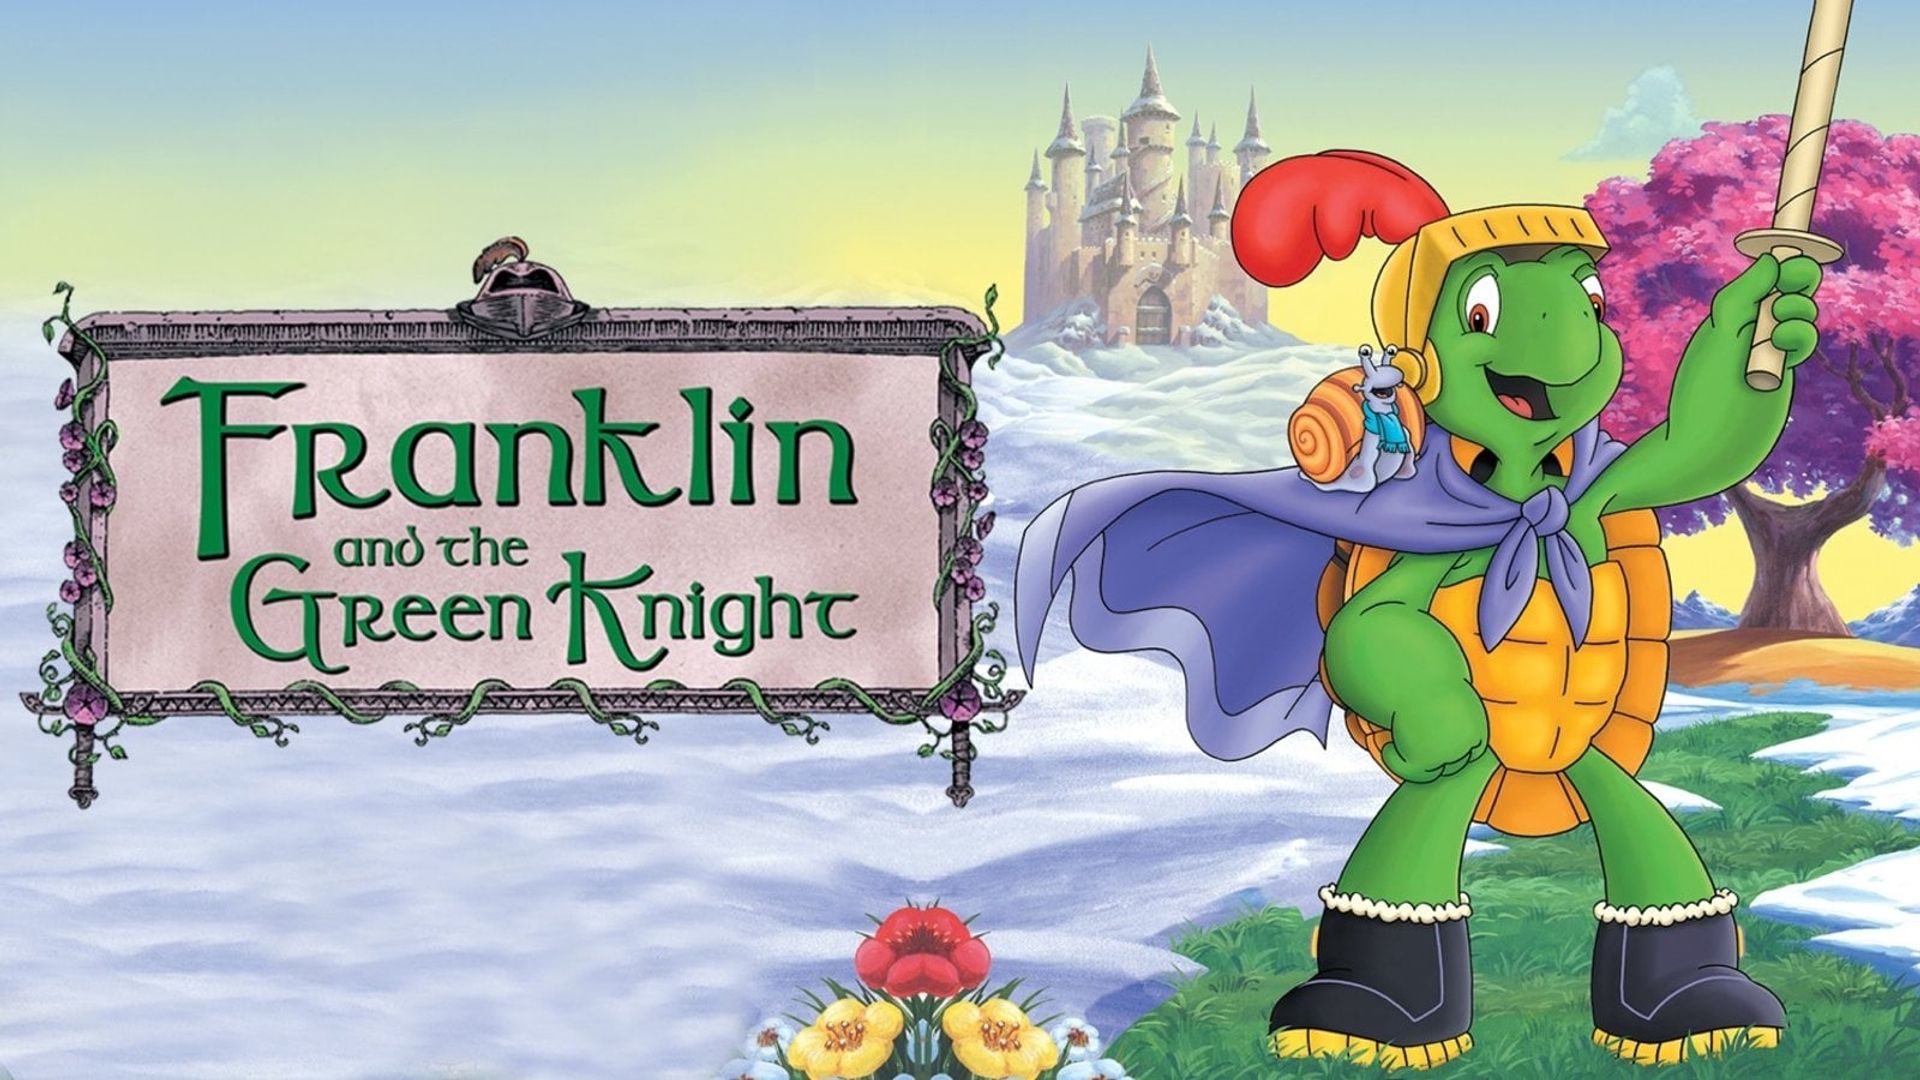 Franklin and the Green Knight: The Movie background